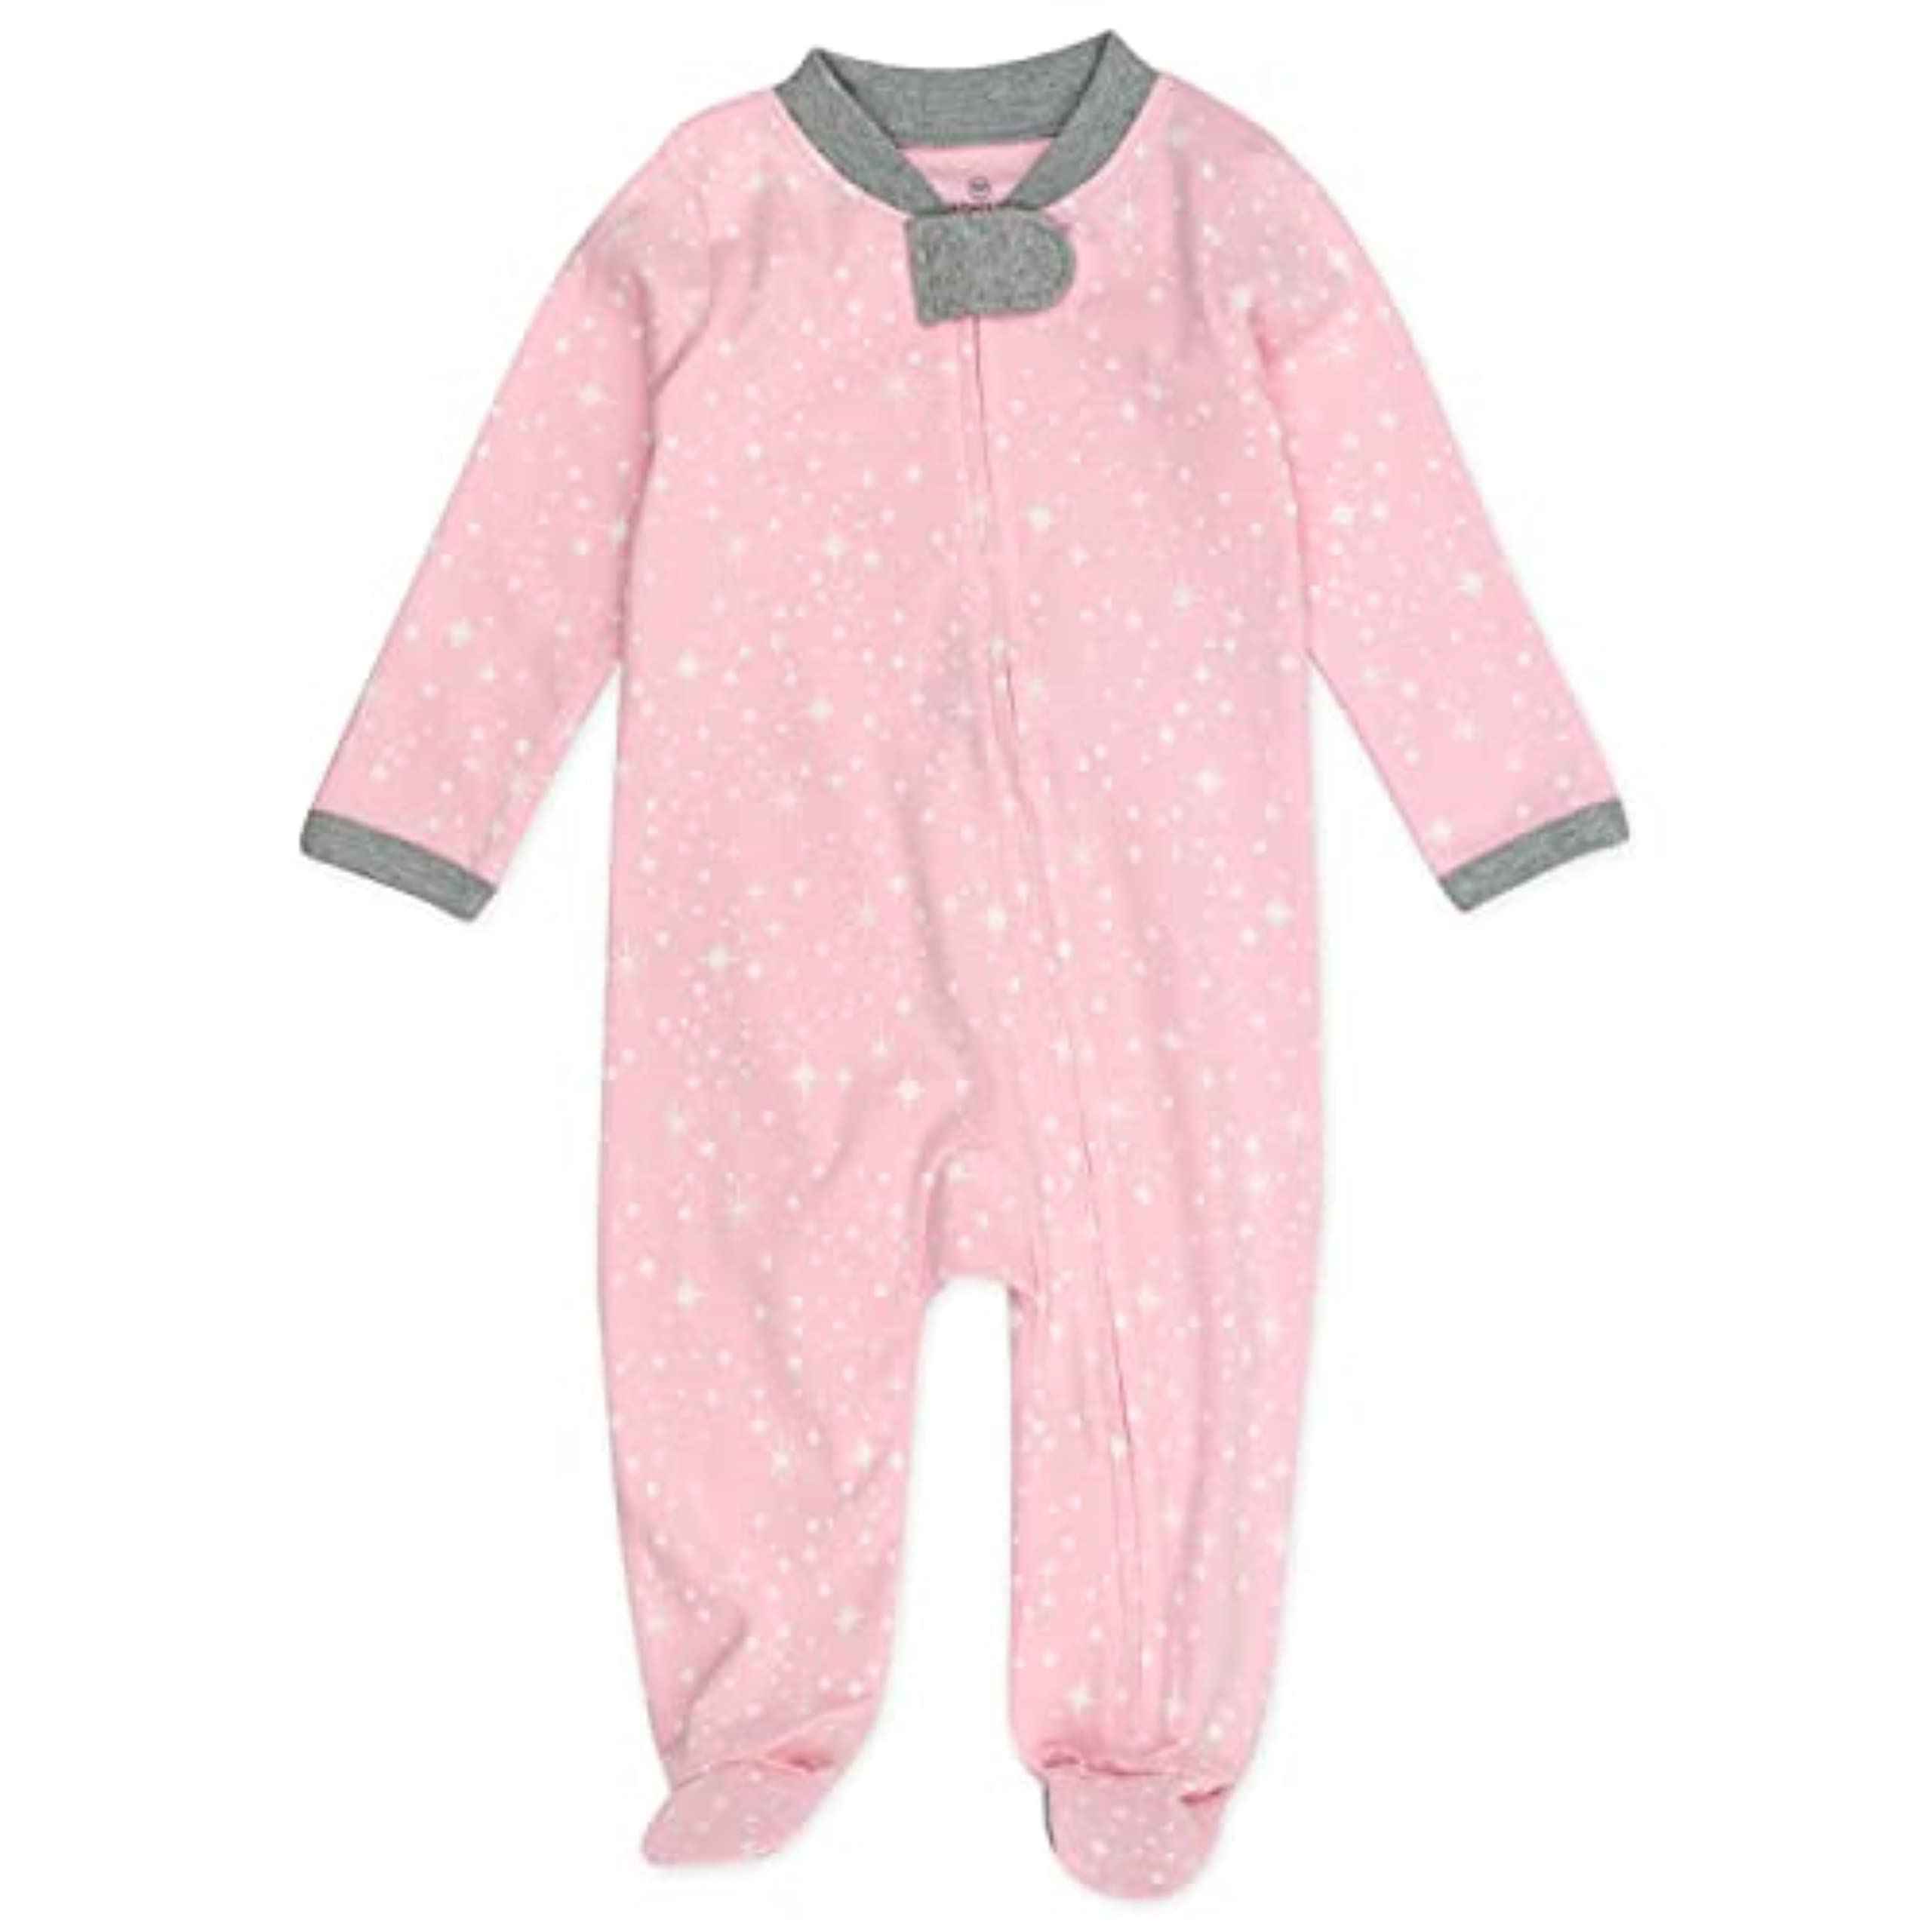 HonestBaby unisex baby Organic cotton Footed  Play Pajamas and Toddler Sleepers, Twinkle Star Pink, 0-3 Months US